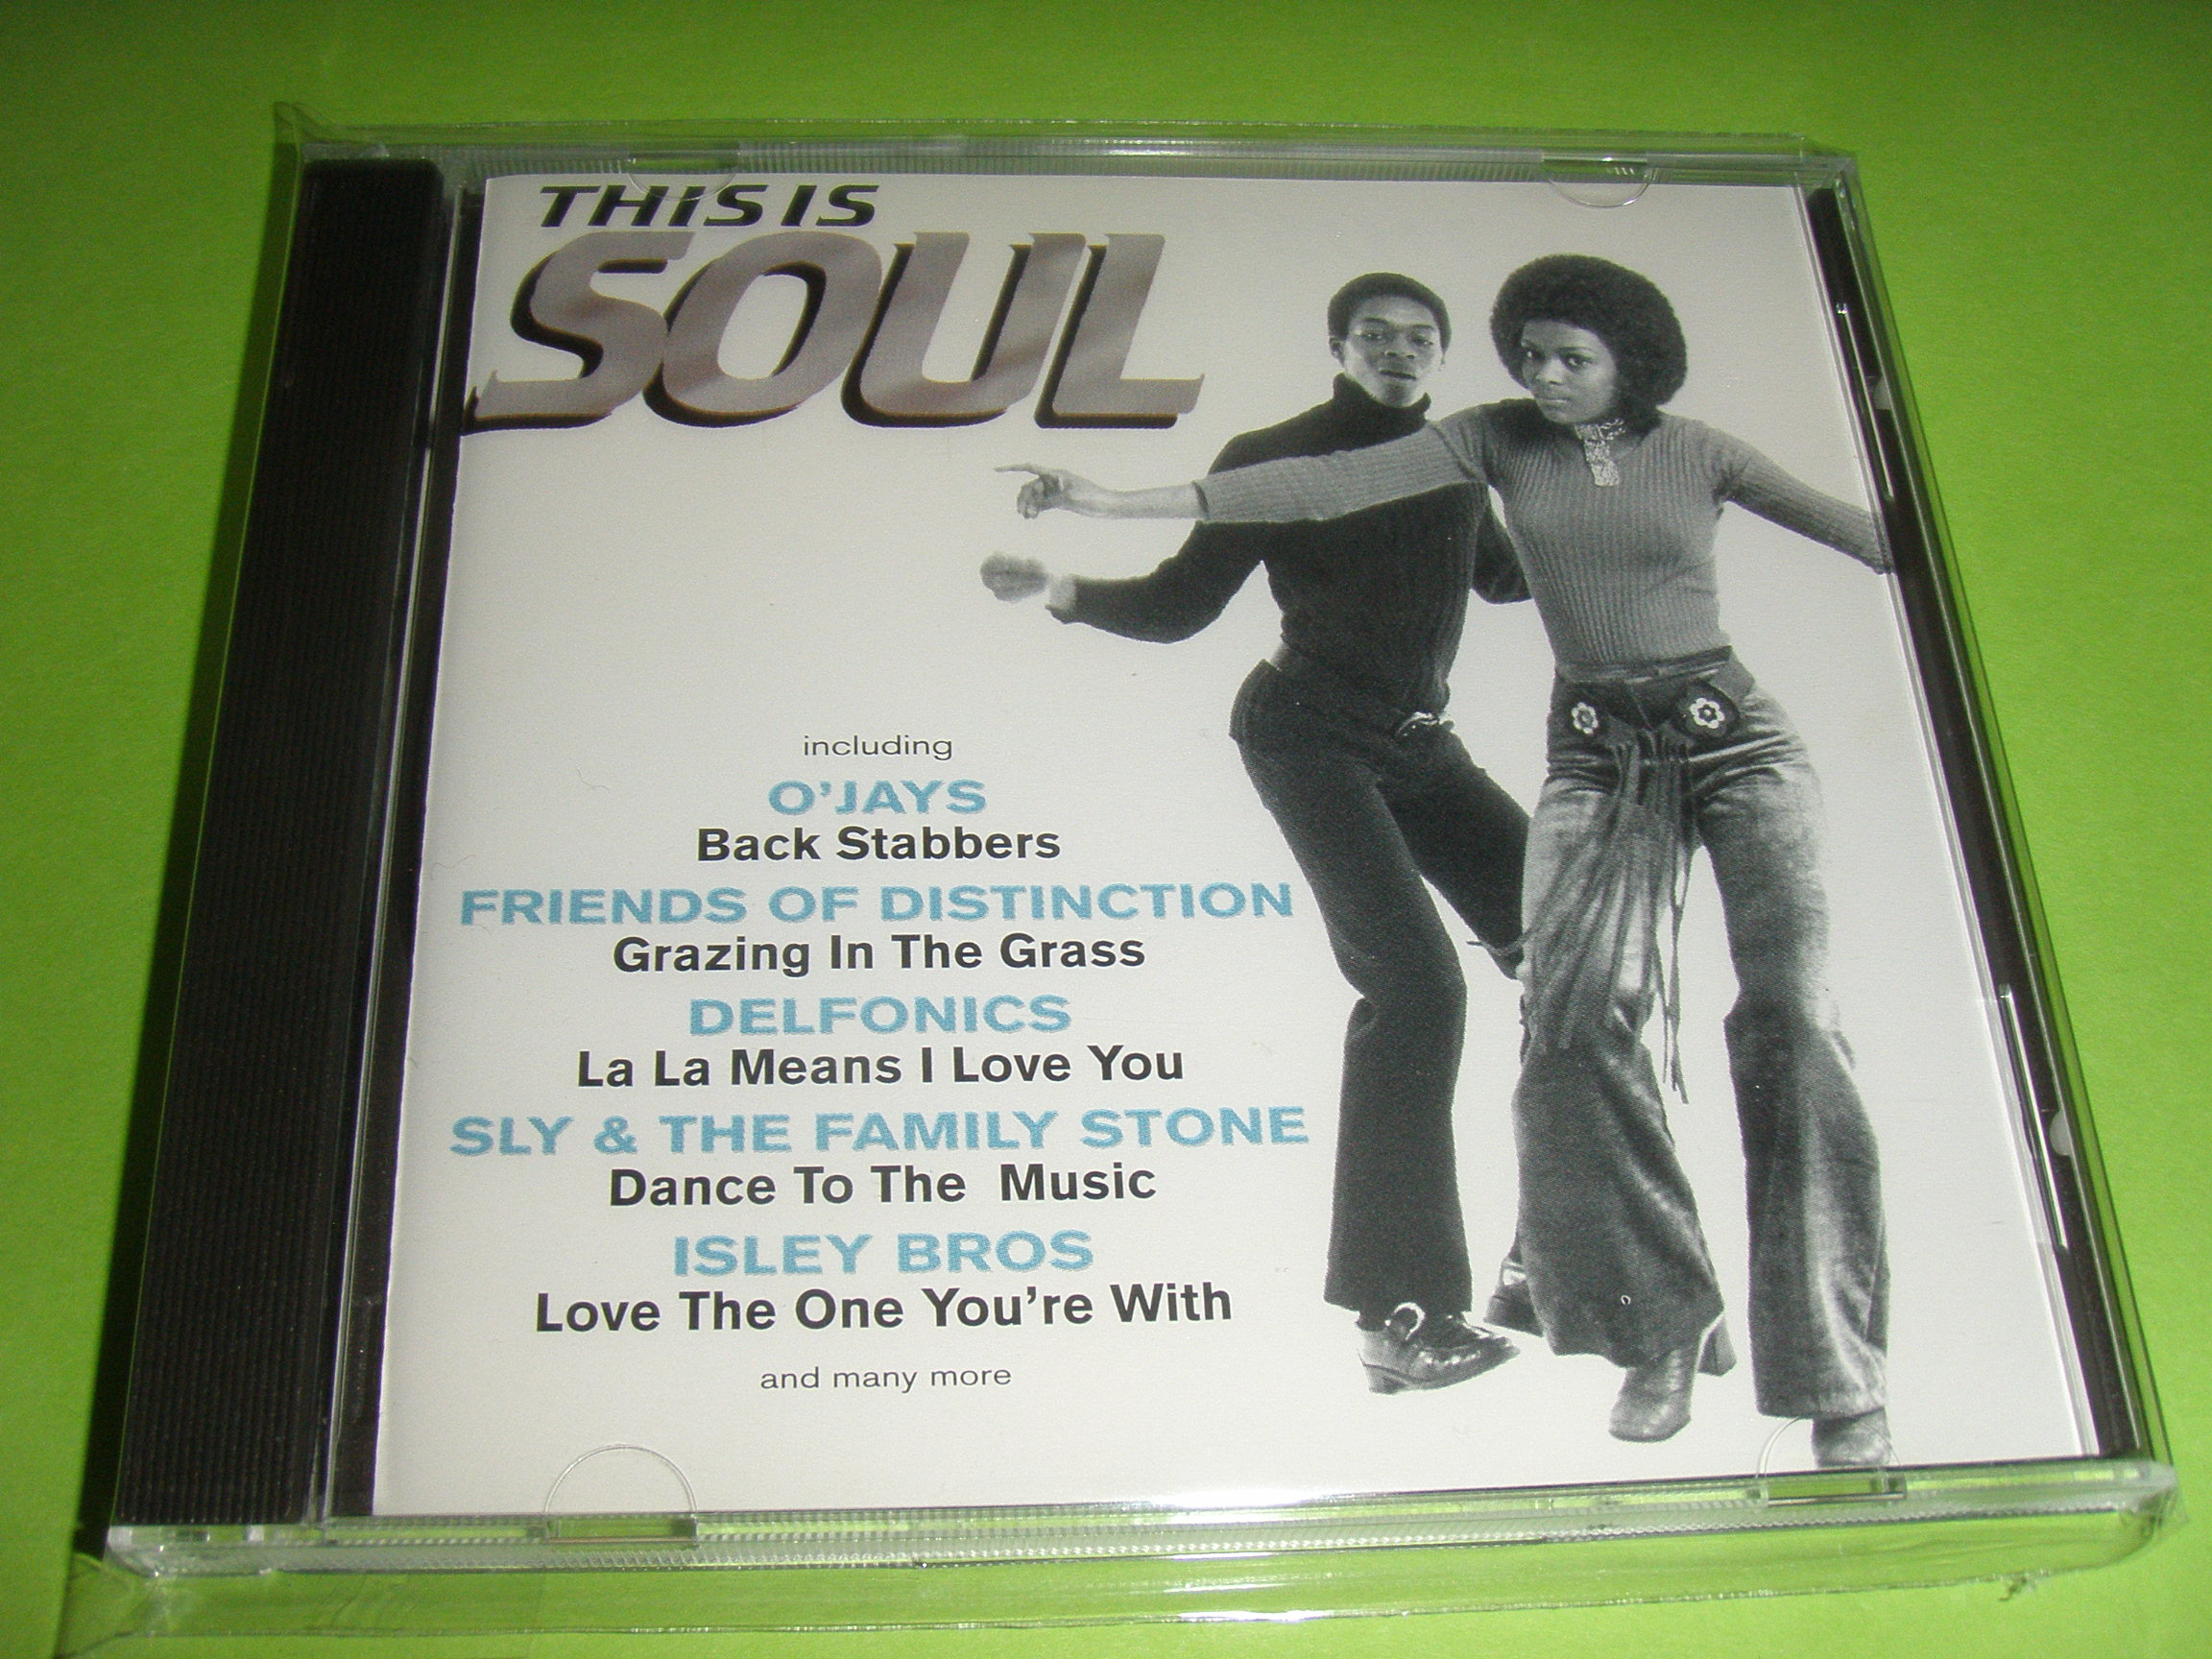 This Is Soul